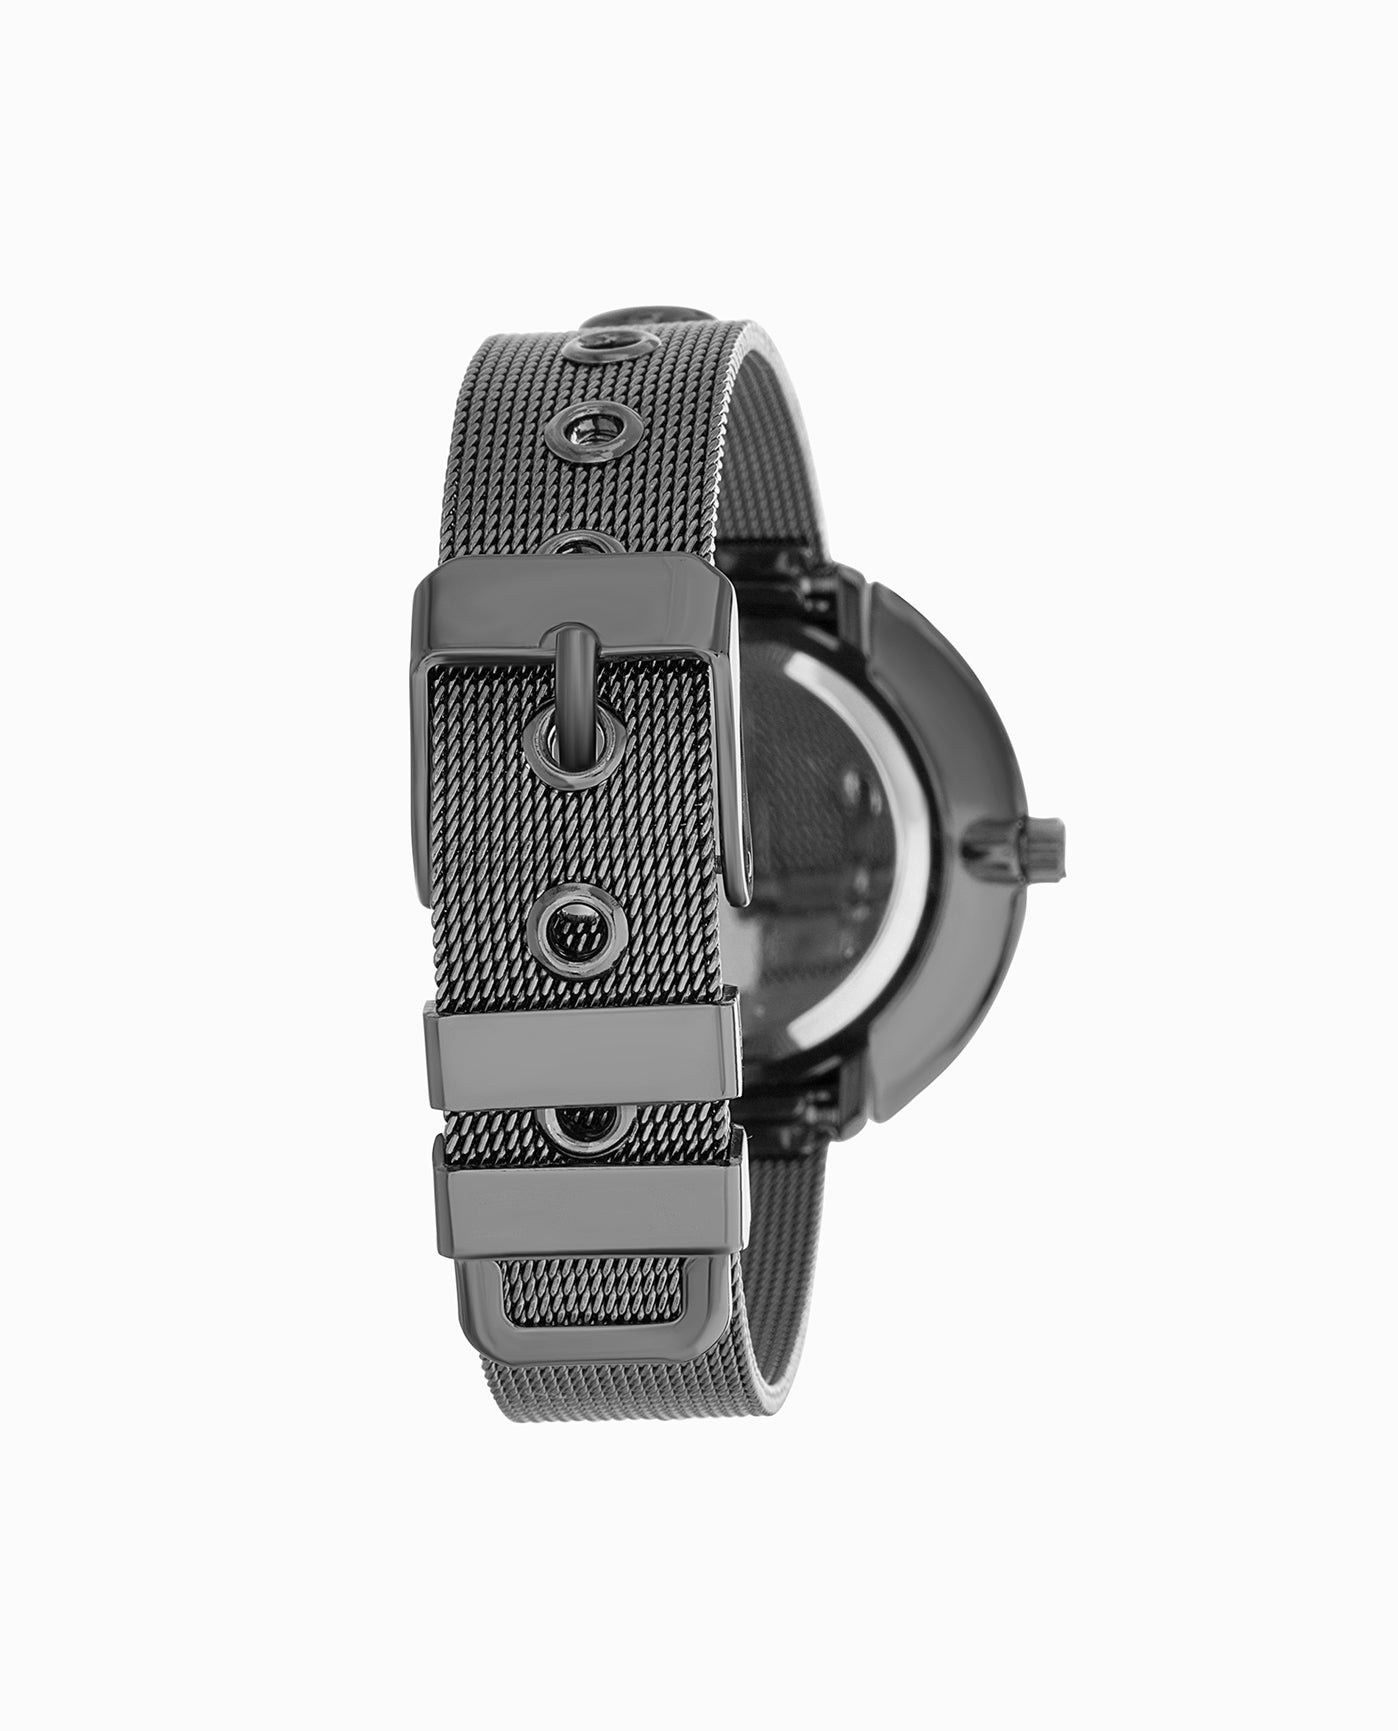 STAINLESS STEEL STRAP WATCH, 36mm BAND CLOSE UP | Black